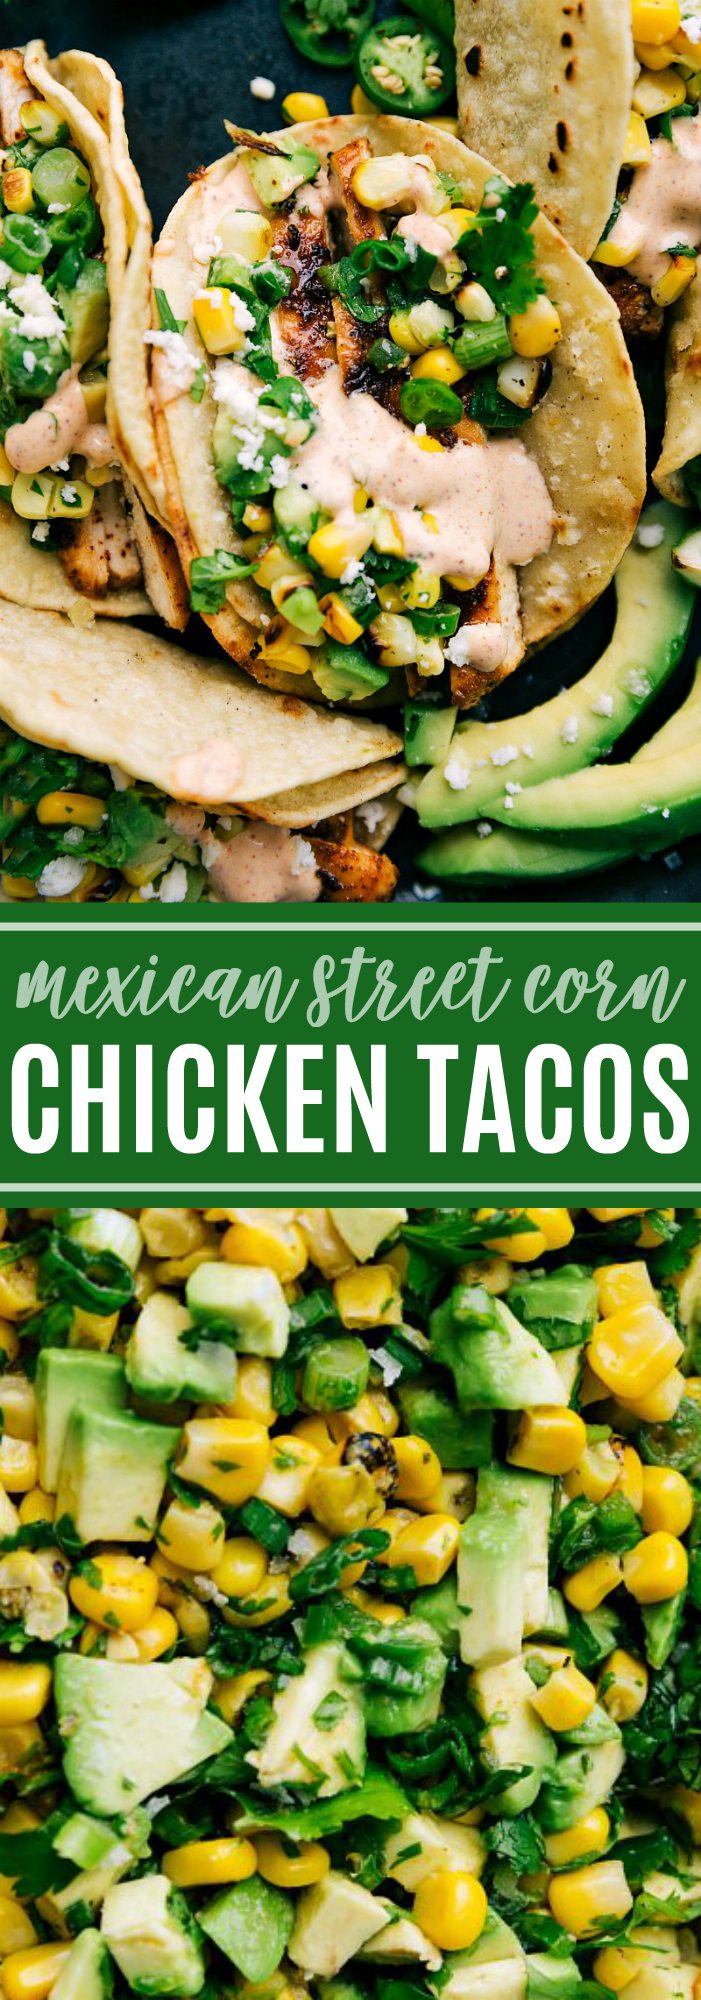 The ultimate BEST EVER chicken tacos! With a Mexican Street Corn topping and the best sauce! via chelseasmessyapron.com #taco #easy #quick #chicken #delicious #marinade #corn #avocado #salsa #sauce